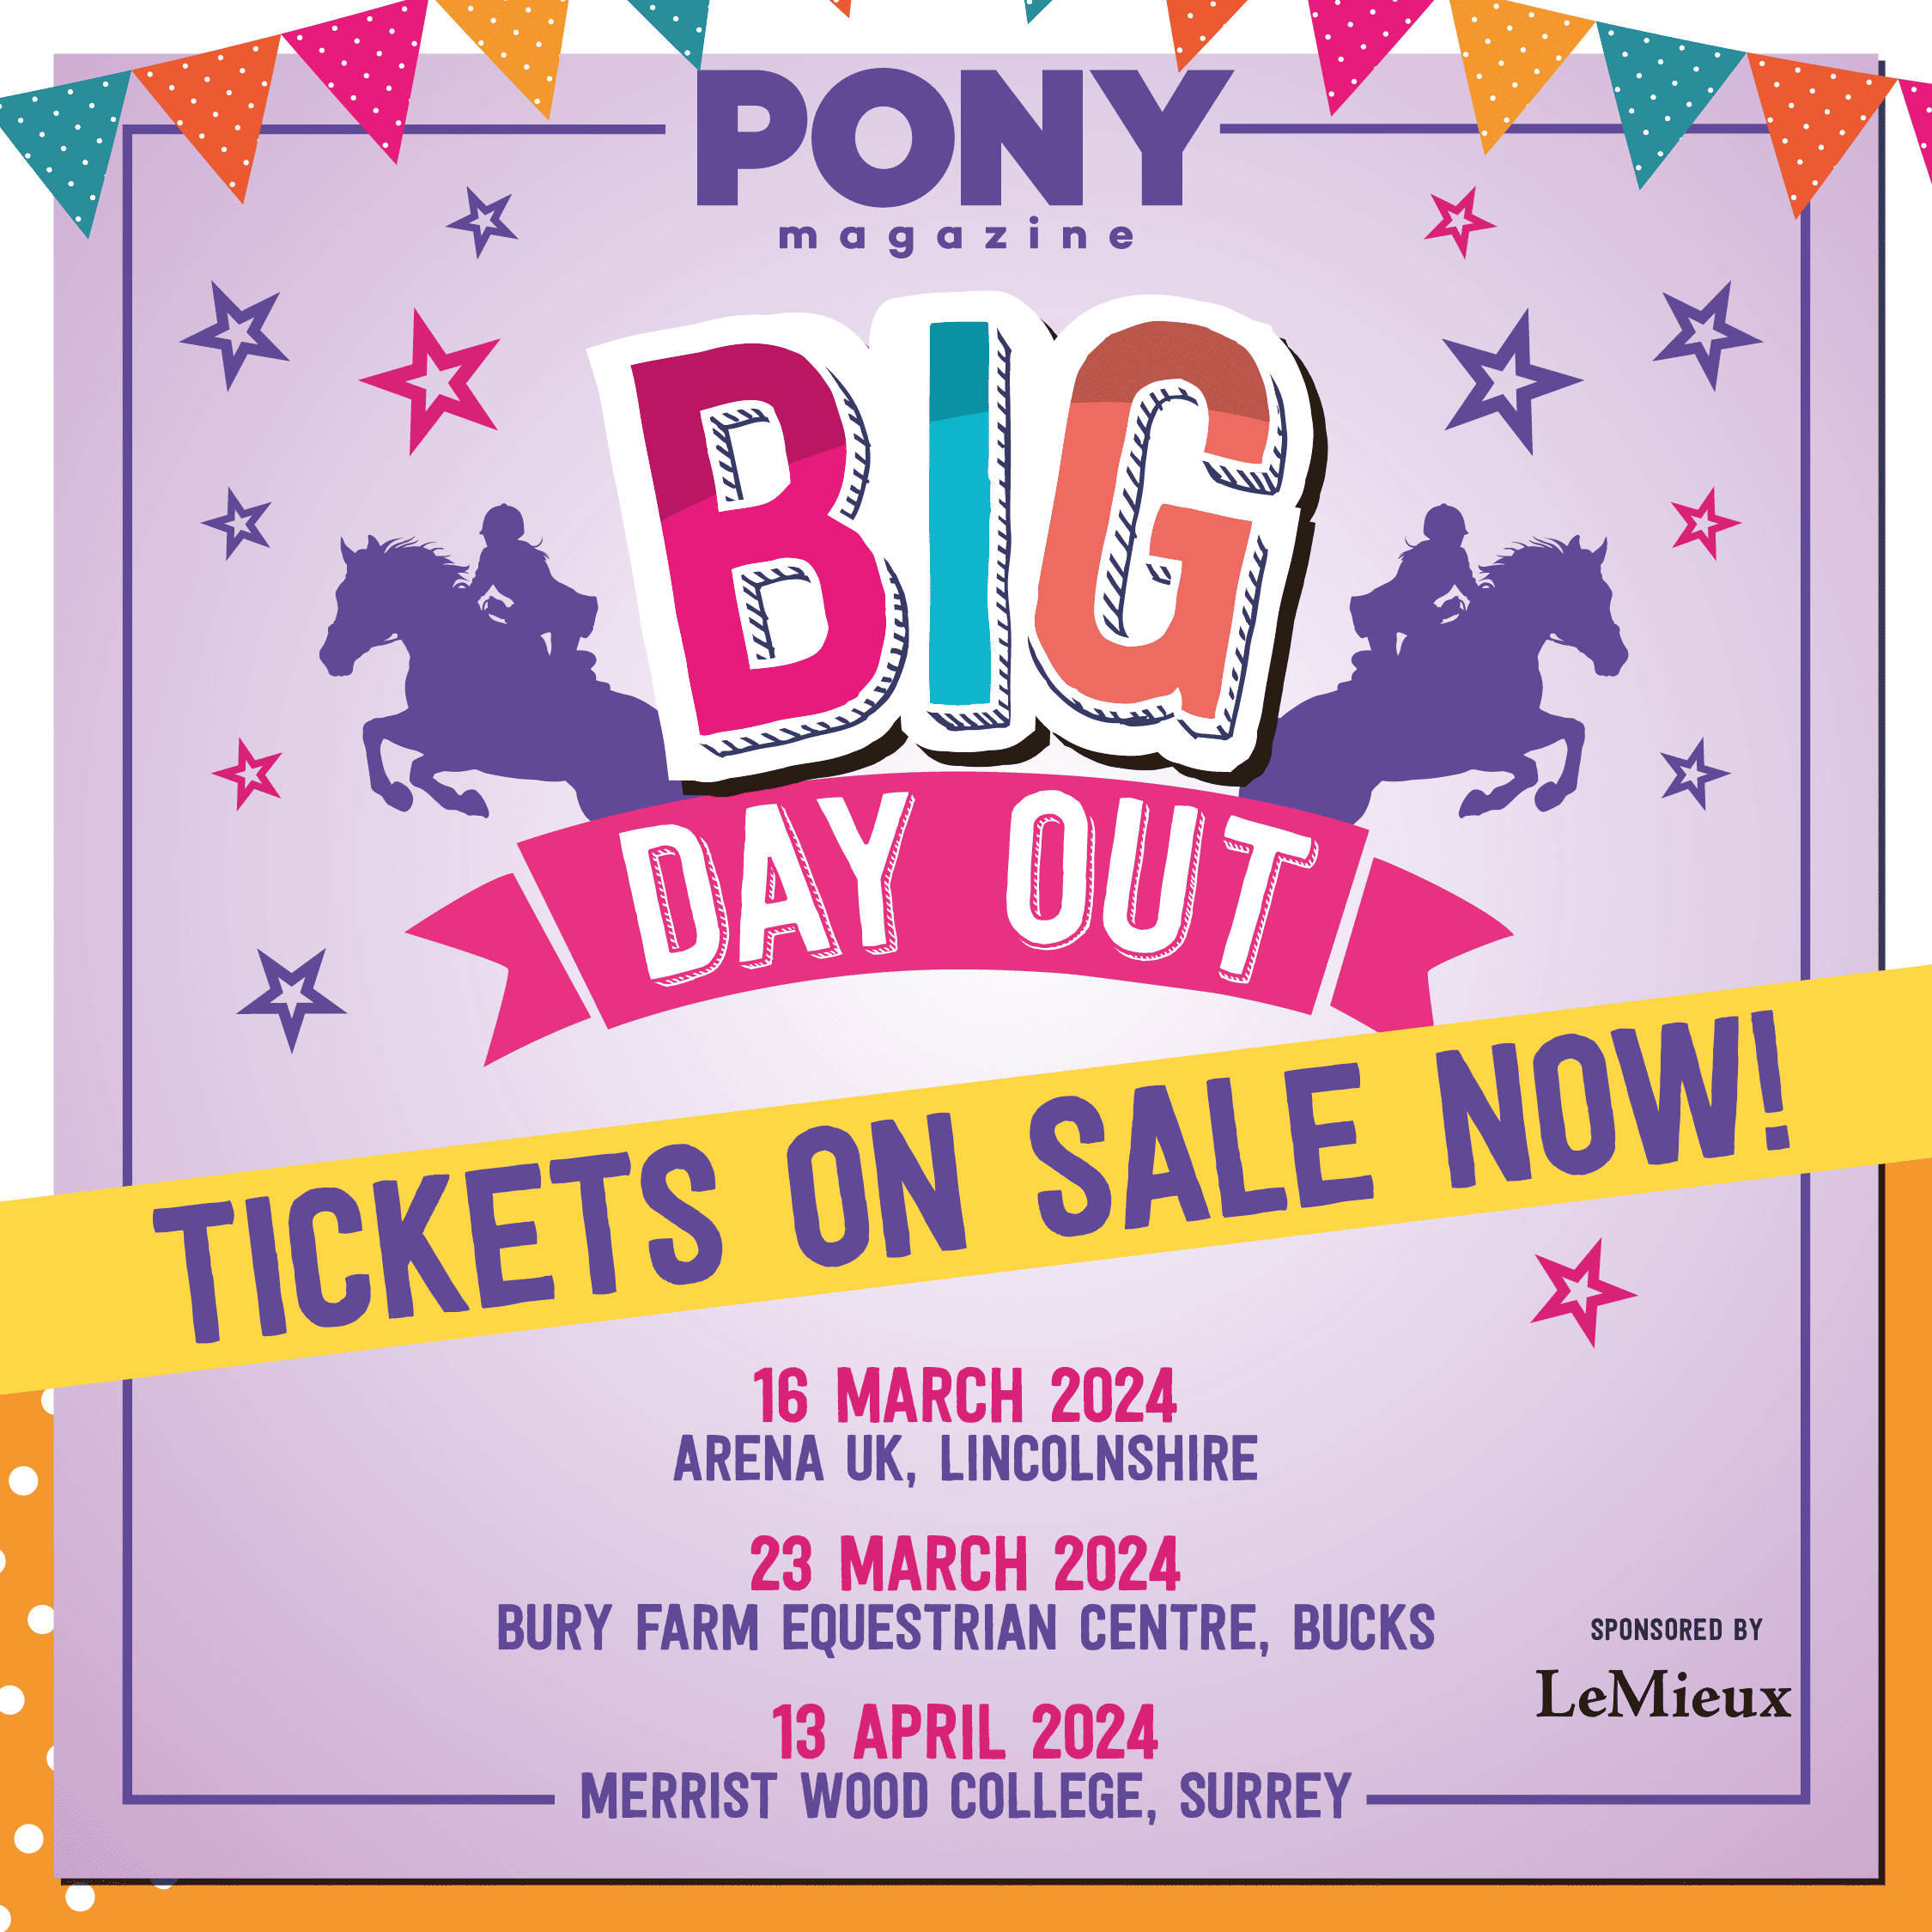 PONY Mag's Big Day Out